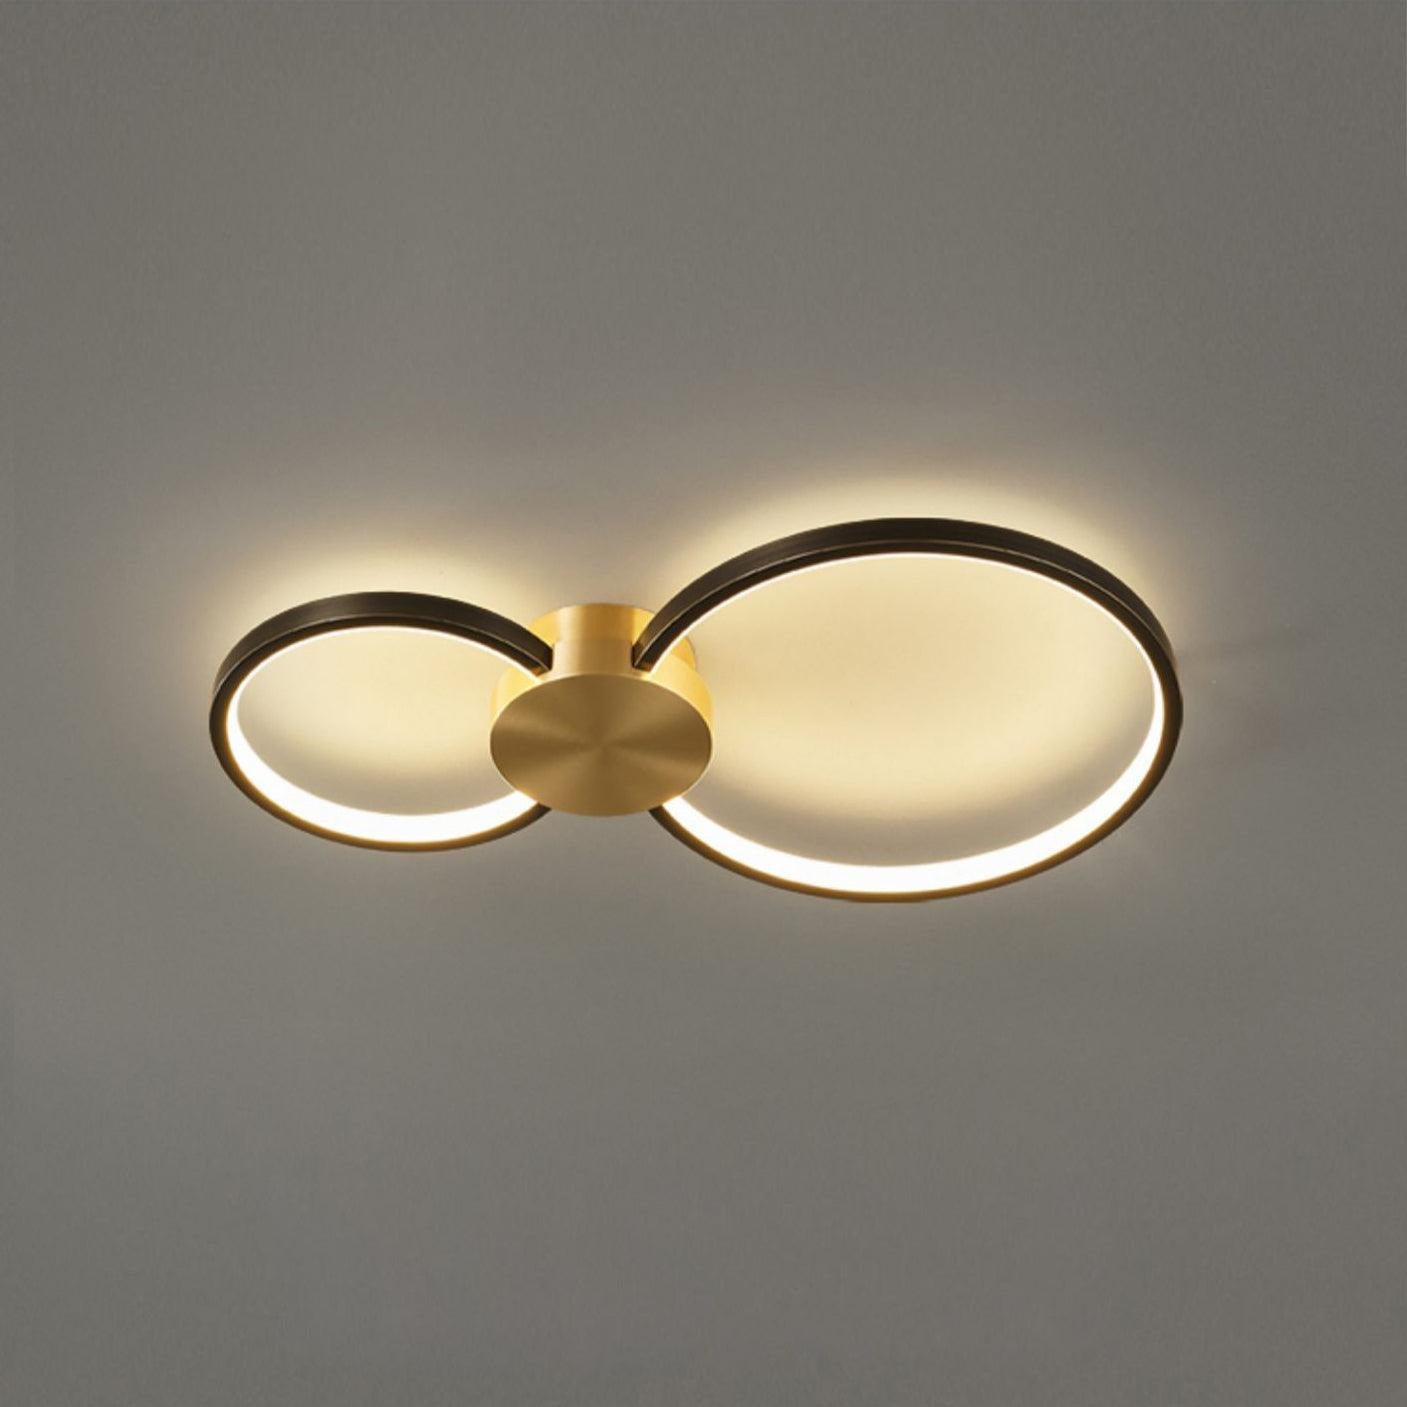 Black Loop LED Ceiling Light with Two Circles - Three-color Changing - Dimensions: 19.7″ x 11.8″ x 2.4″ (50cm x 30cm x 6cm)